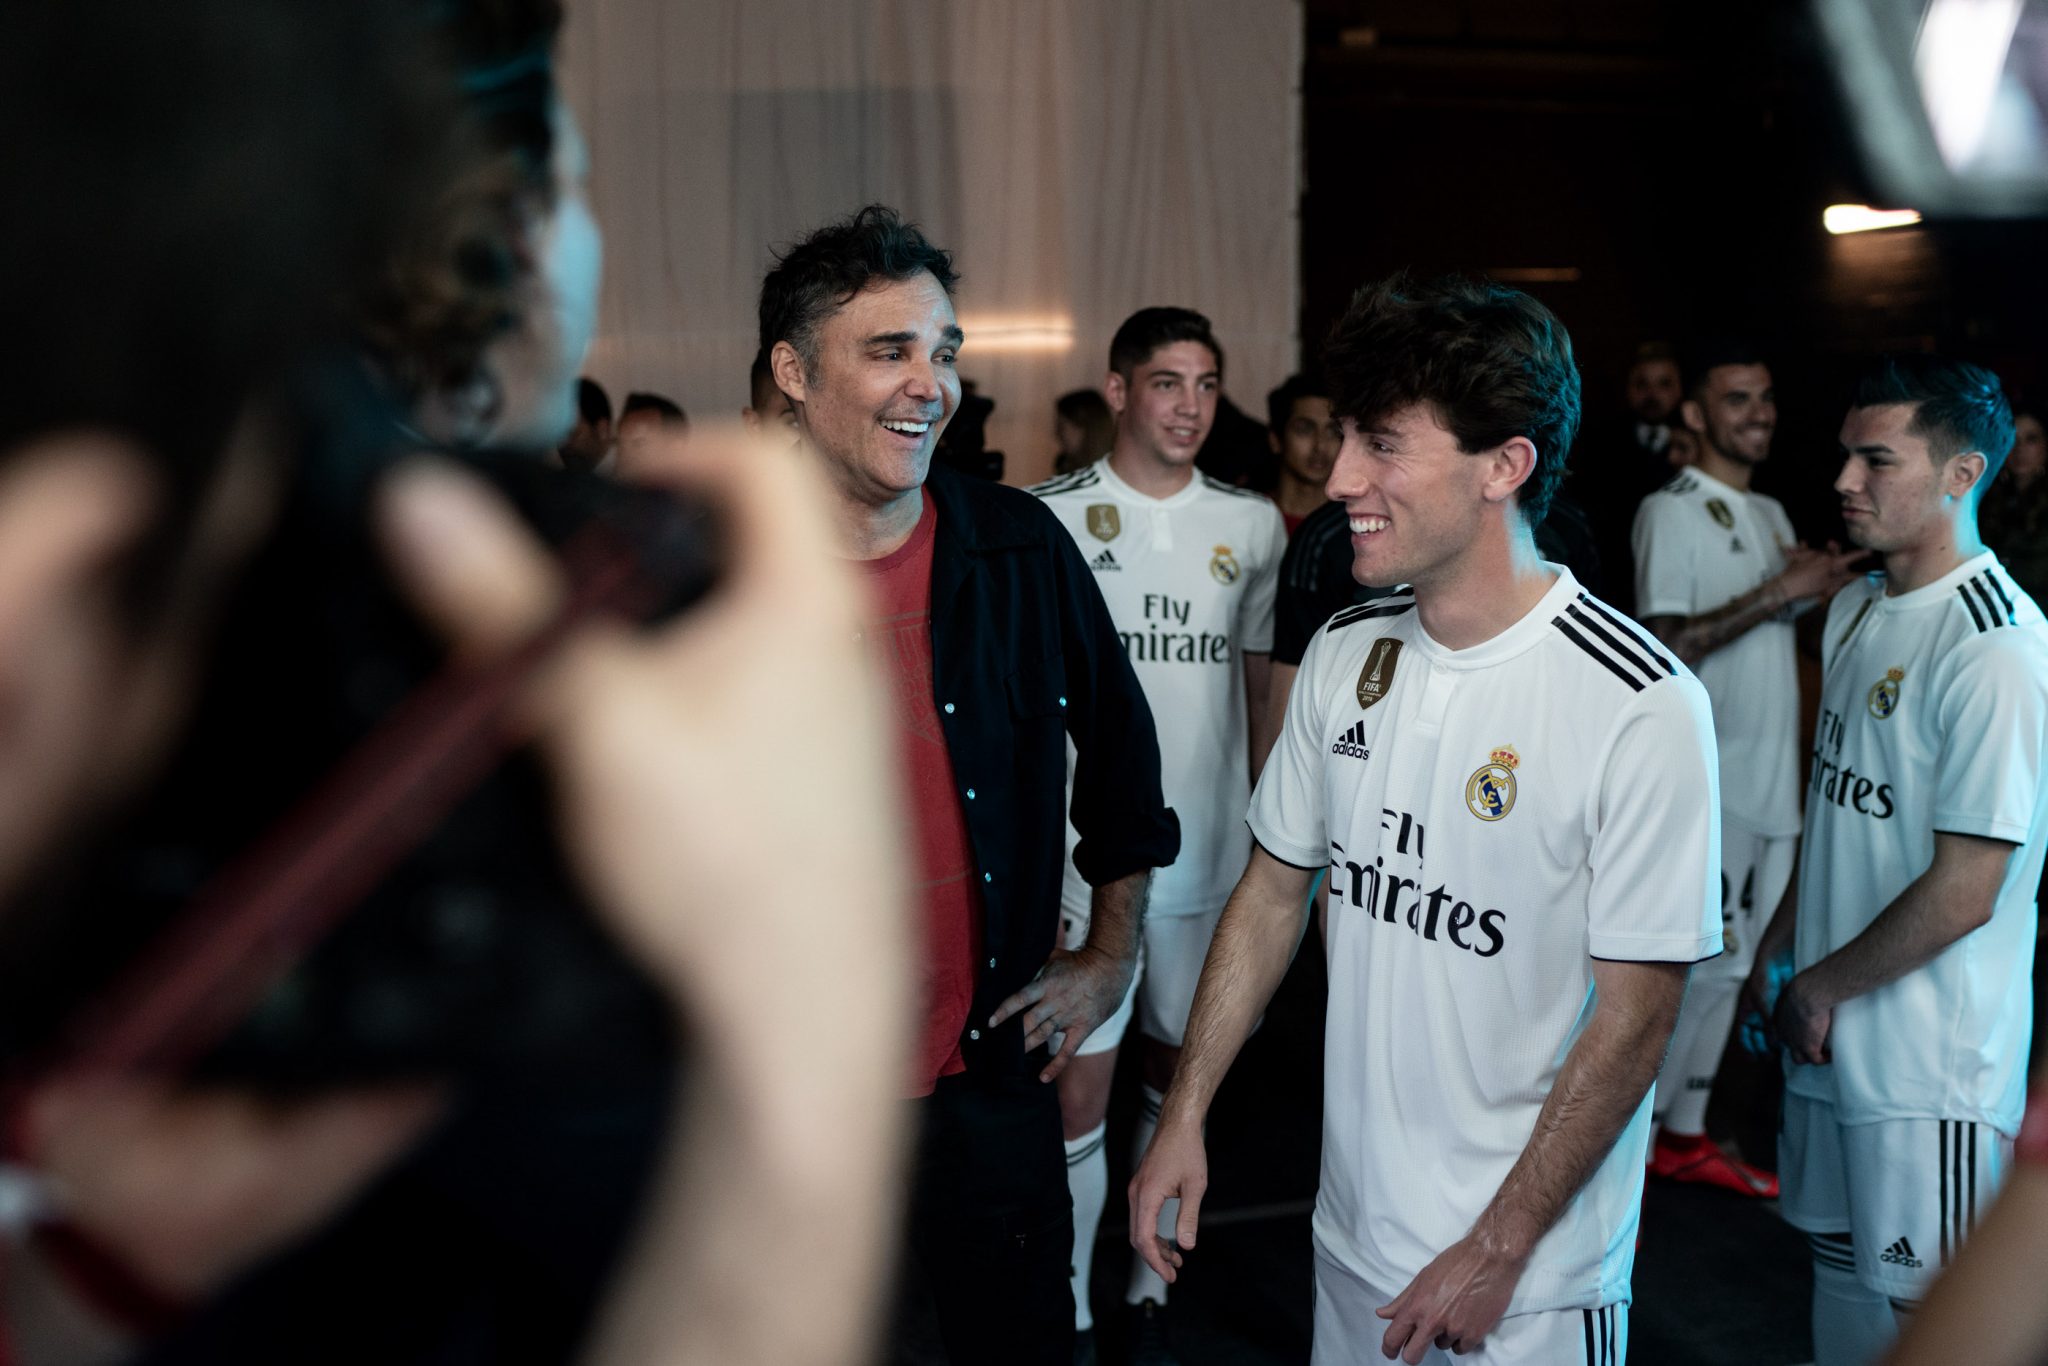 David LaChapelle | Audi x Real Madrid | Behind-the-scenes photographs from the Audi E-tron launch shoot in Madrid. | 13